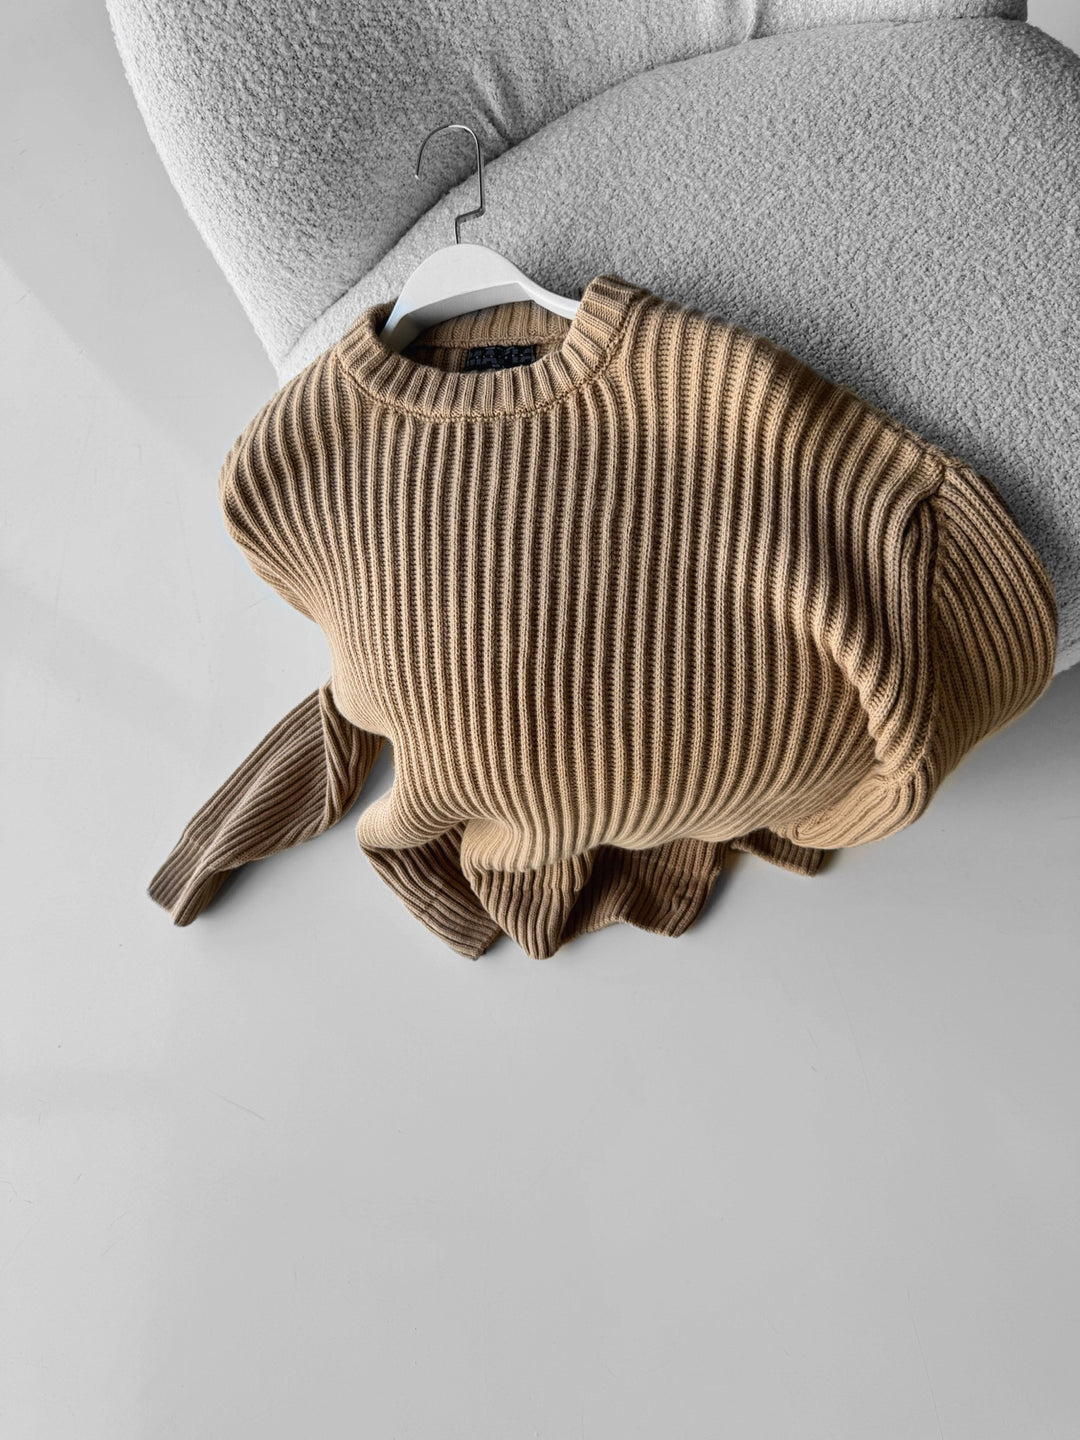 Oversize Heavy Knit Sweater - Cappuccino